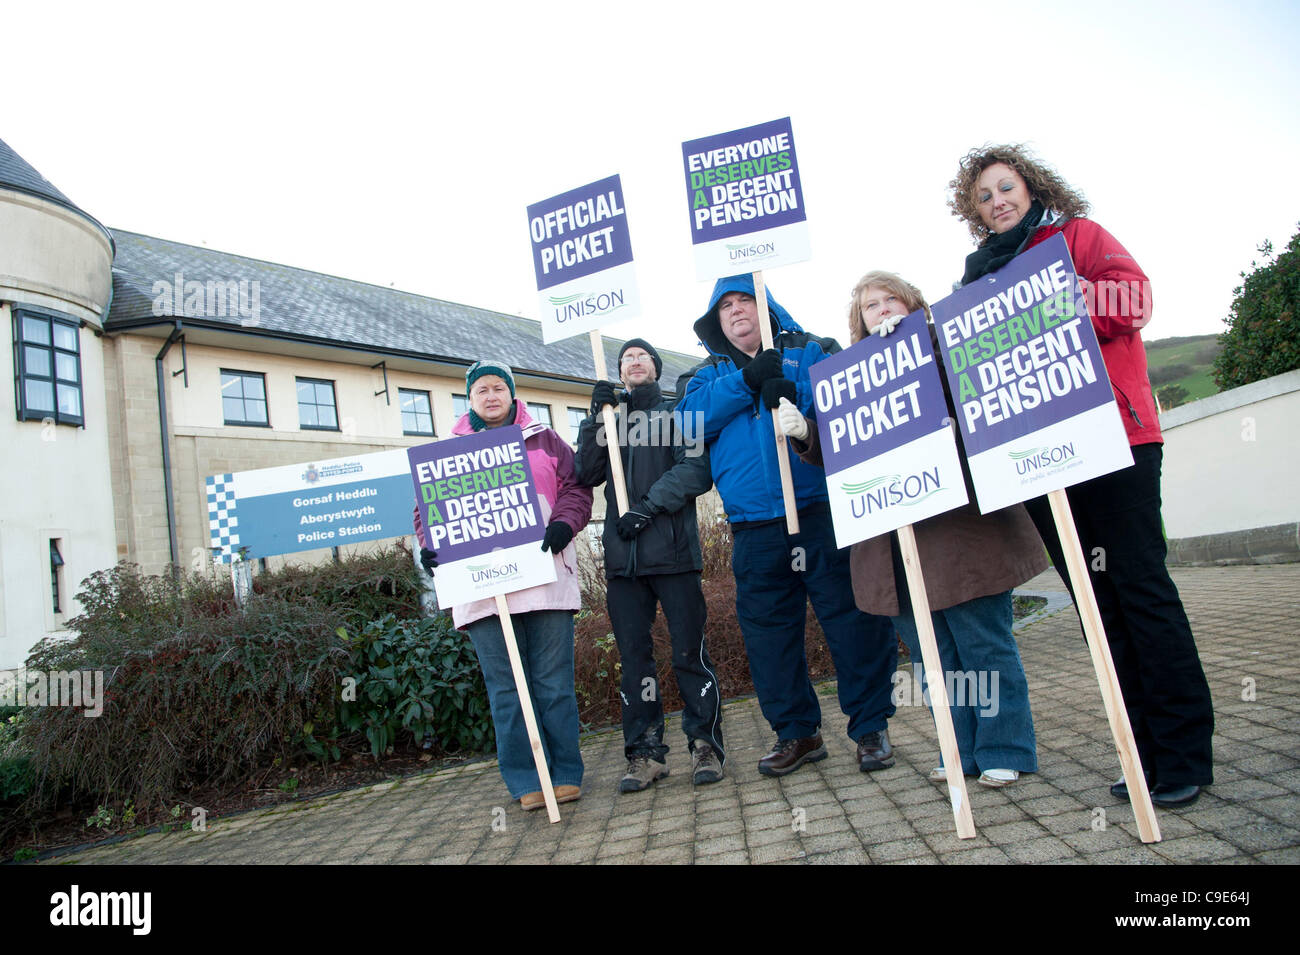 UNISON UNION MEMBERS PICKETING OUTSIDE ABERYSTWYTH POLICE STATION, Aberystwyth Wales UK, November 30 2011. An estimated 2 million public sector union members went on a one-day strike to protest at threats to their pension provision. Stock Photo